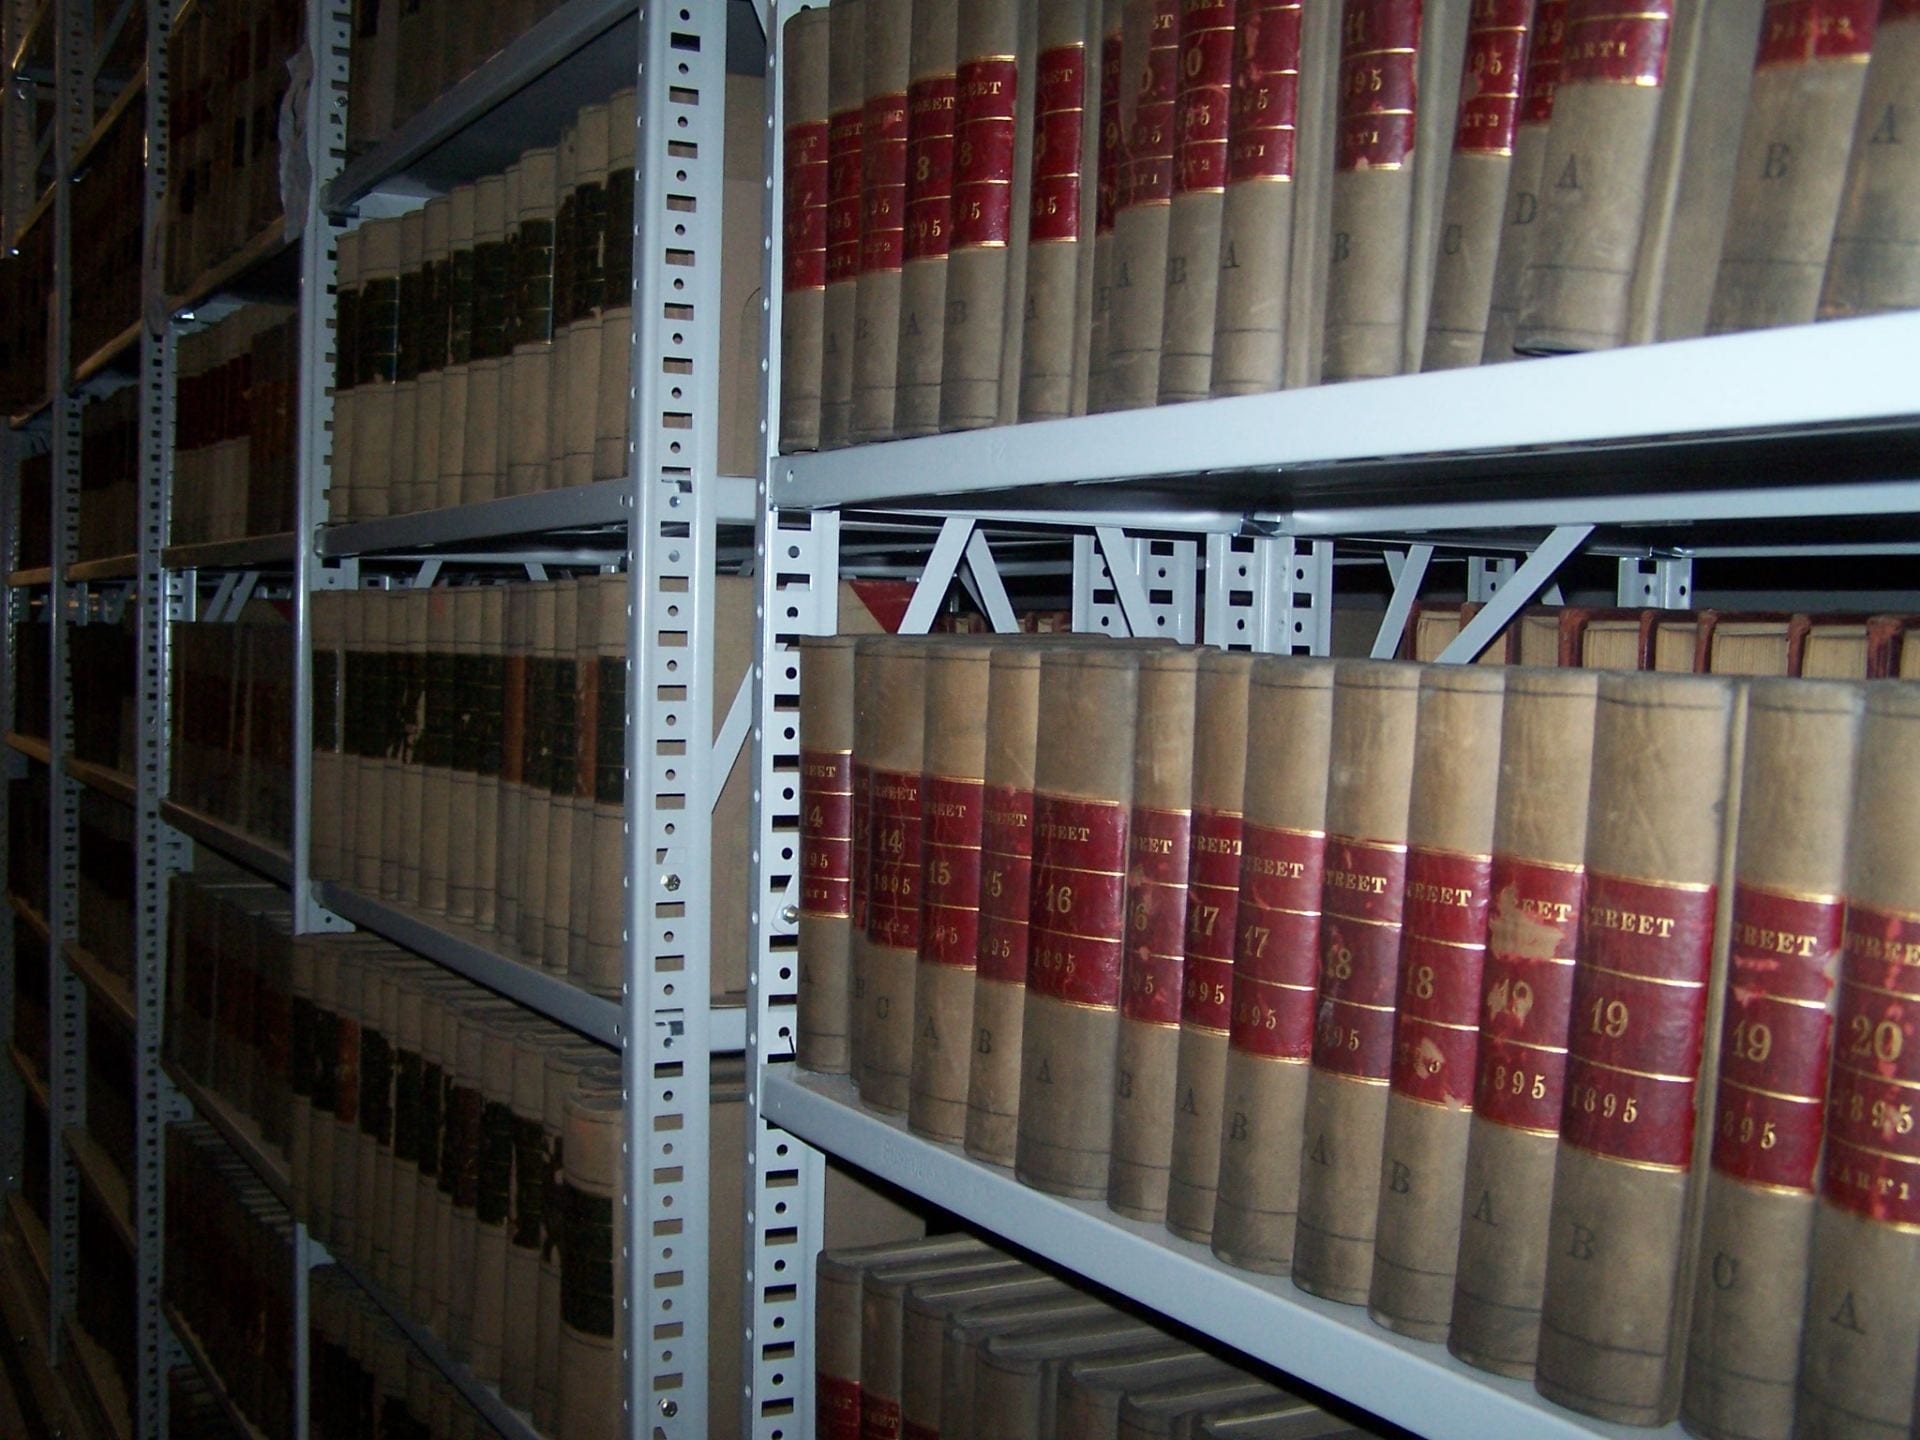 Shelves of bound volumes of records at the City Archives of Boston.